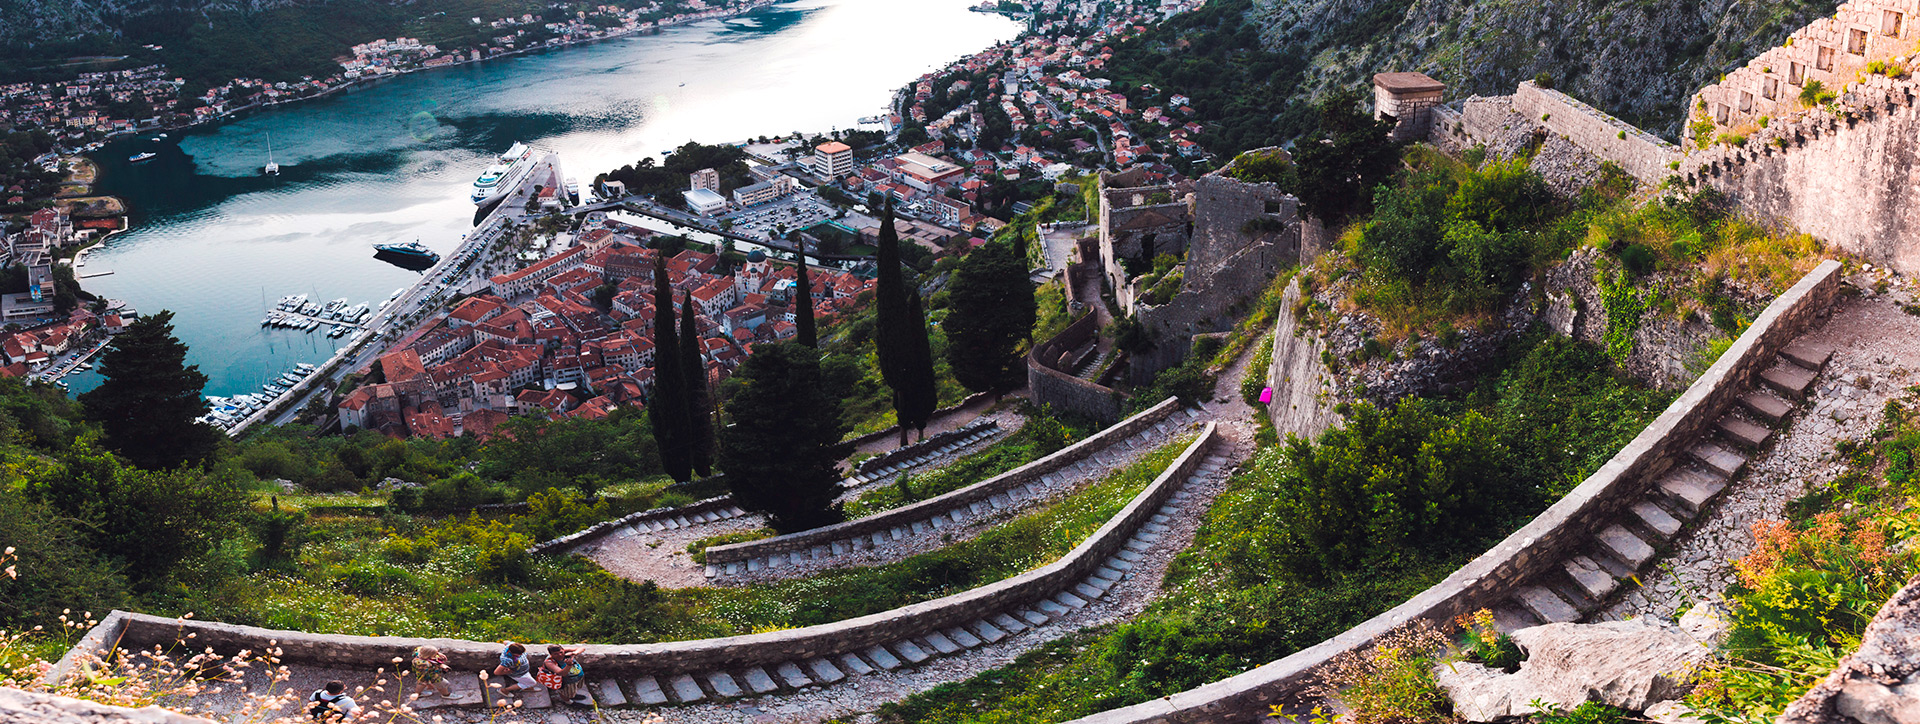 View of the Old town and the Bay of Kotor, Montenegro